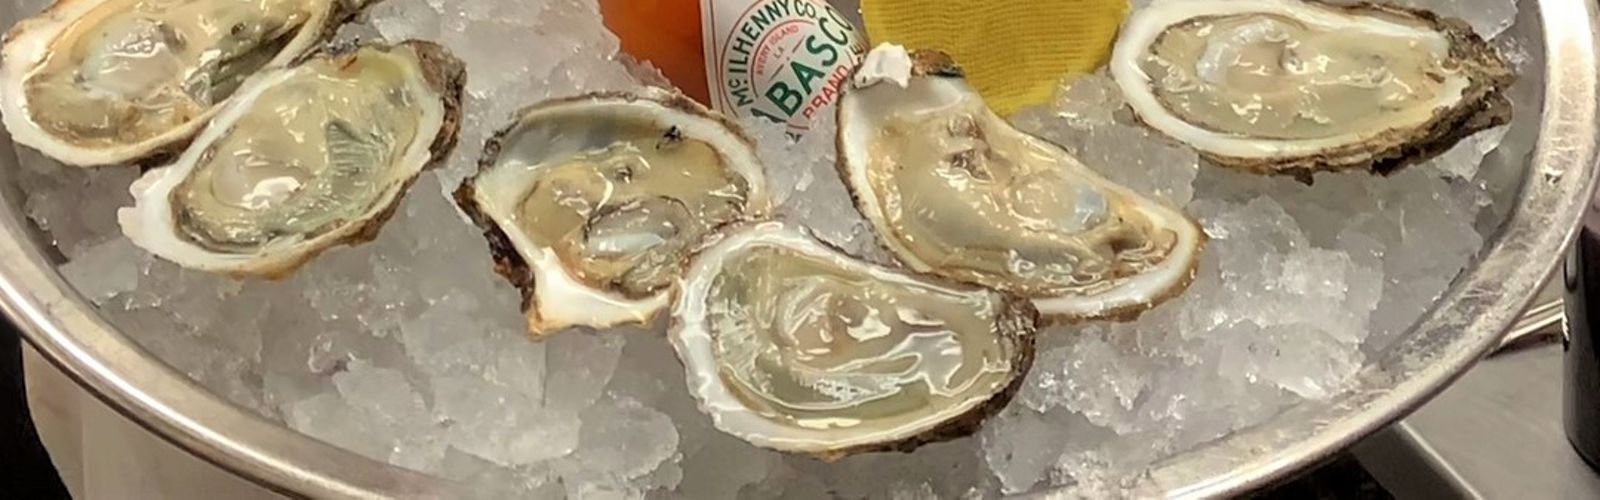 A dozen oysters and a bottle of Tabasco are presented on a silver tray.